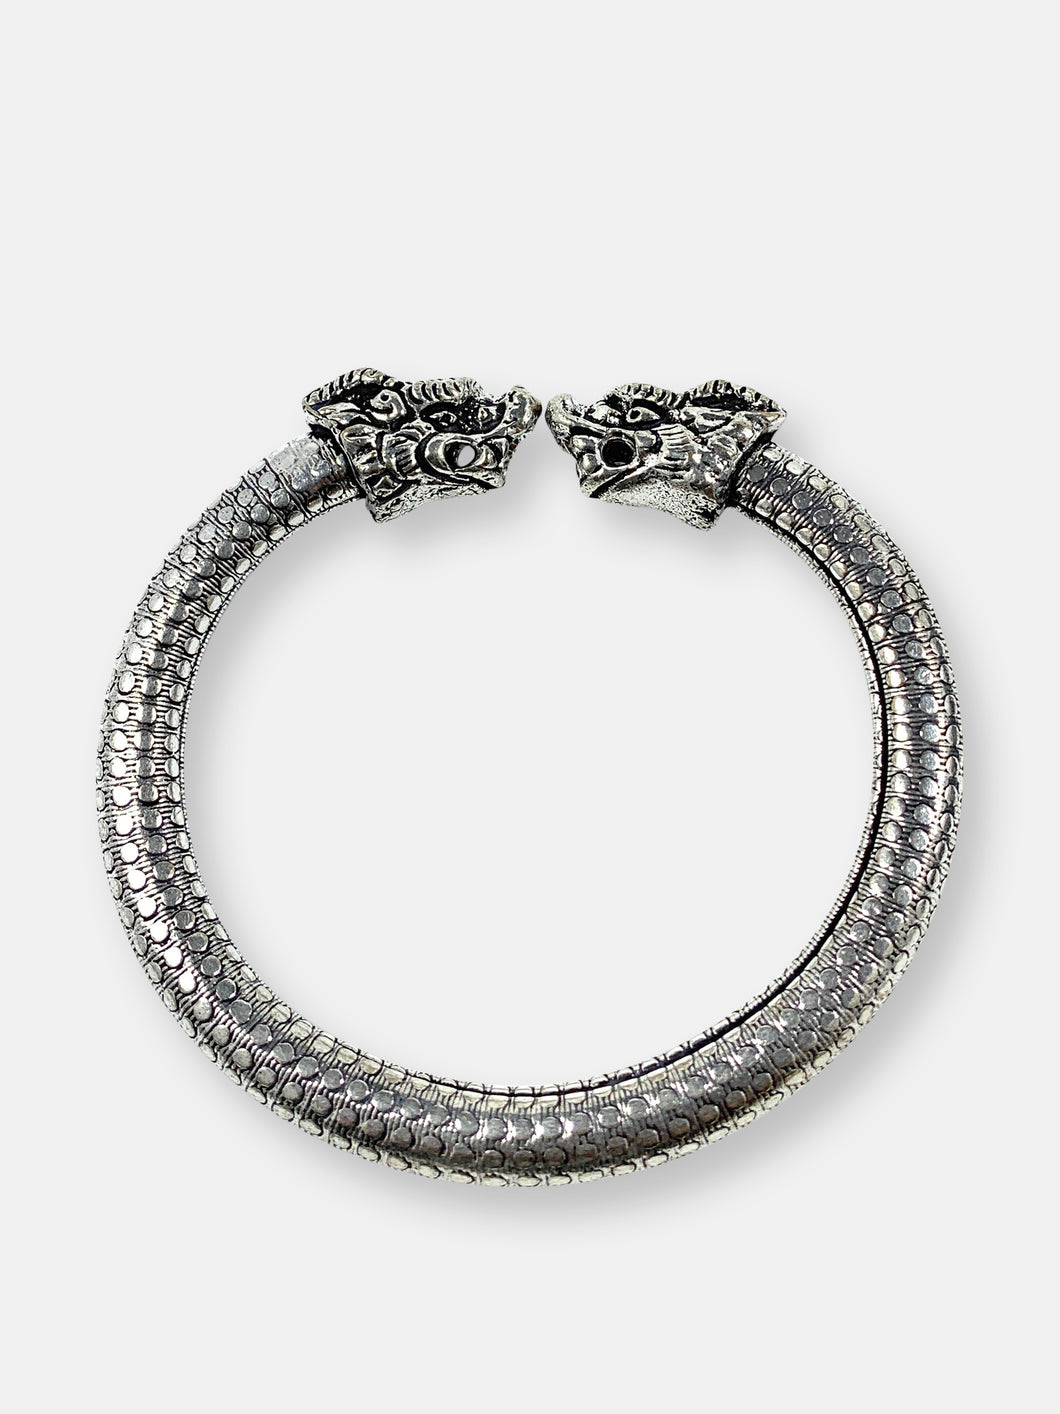 Antique Norse Bracelet With Lion Heads & Dotted Pattern